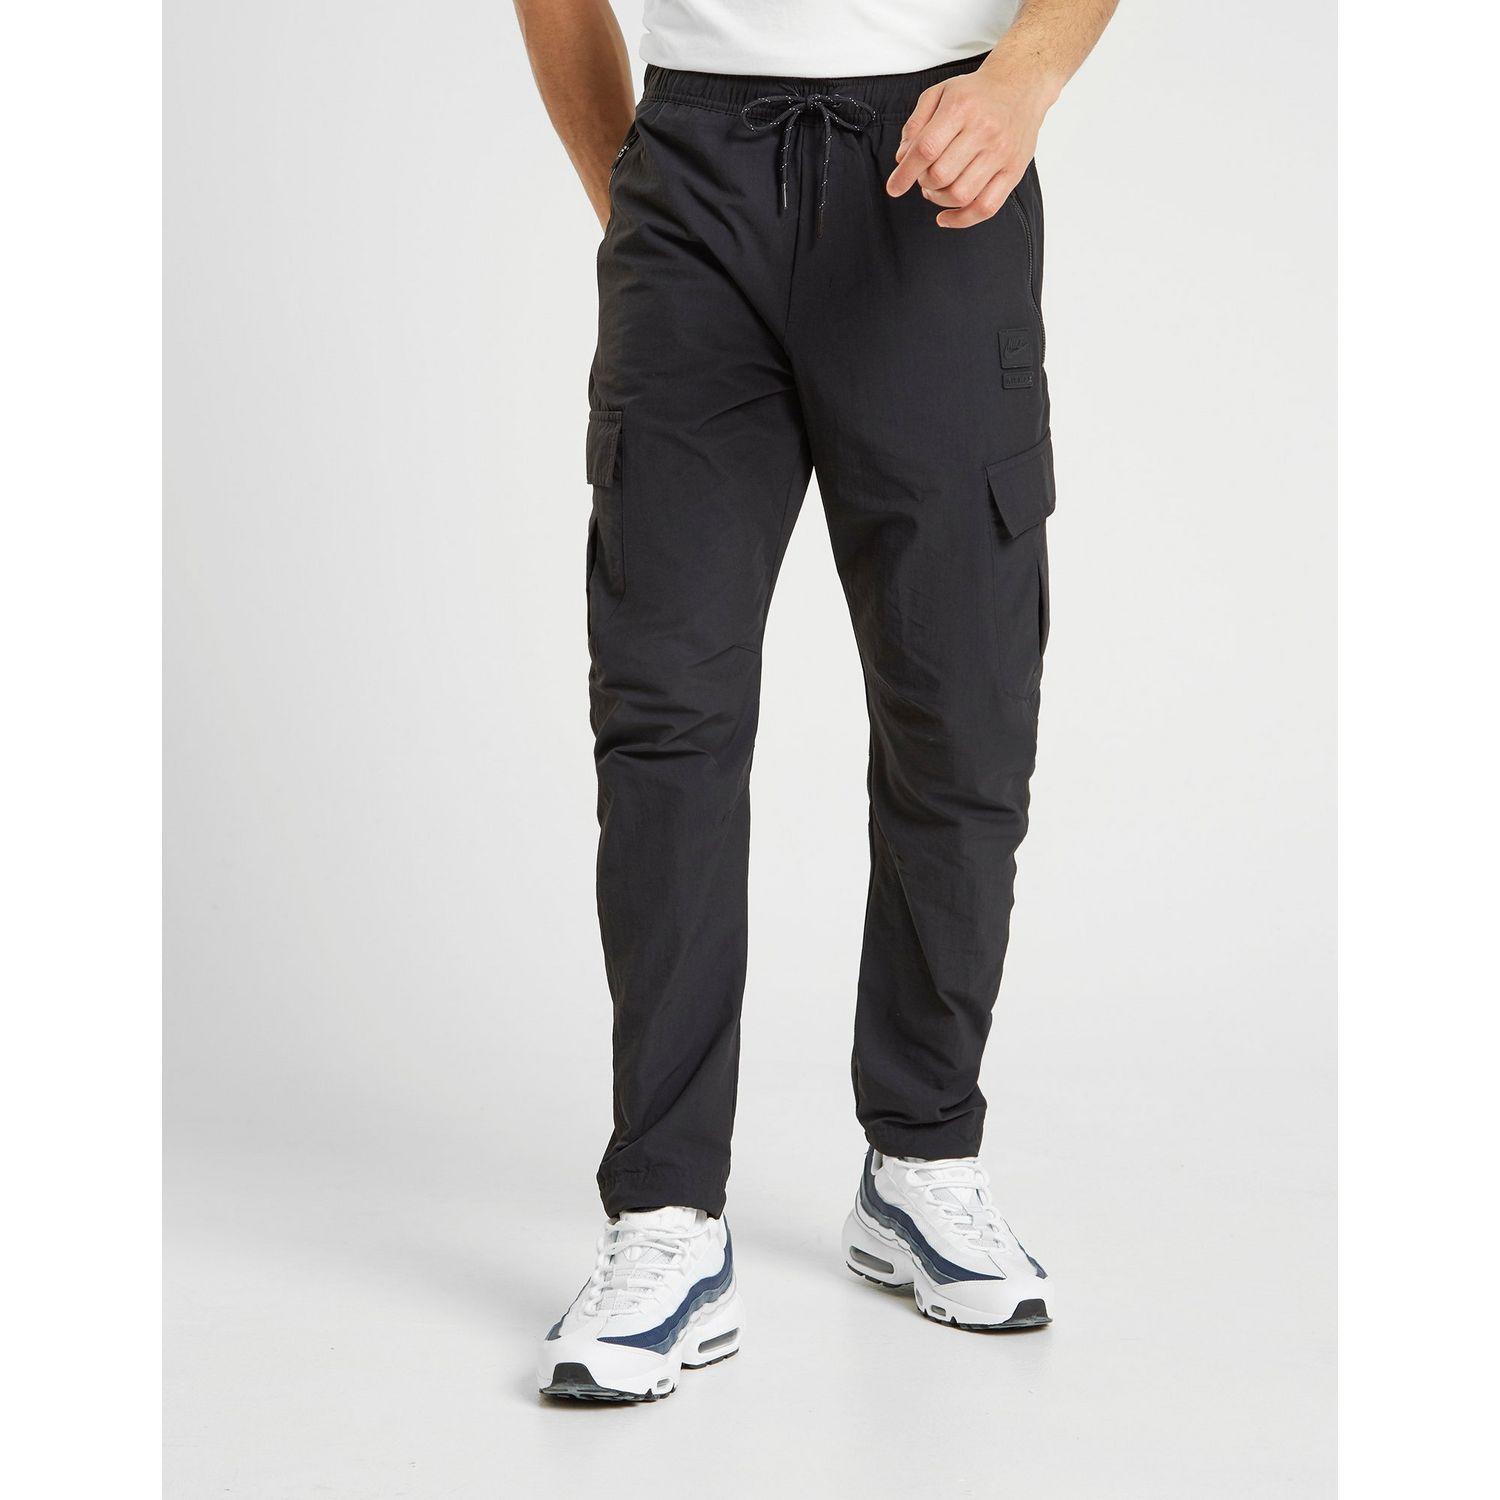 Nike Synthetic Air Max Cargo Track Pants in Black for Men - Lyst